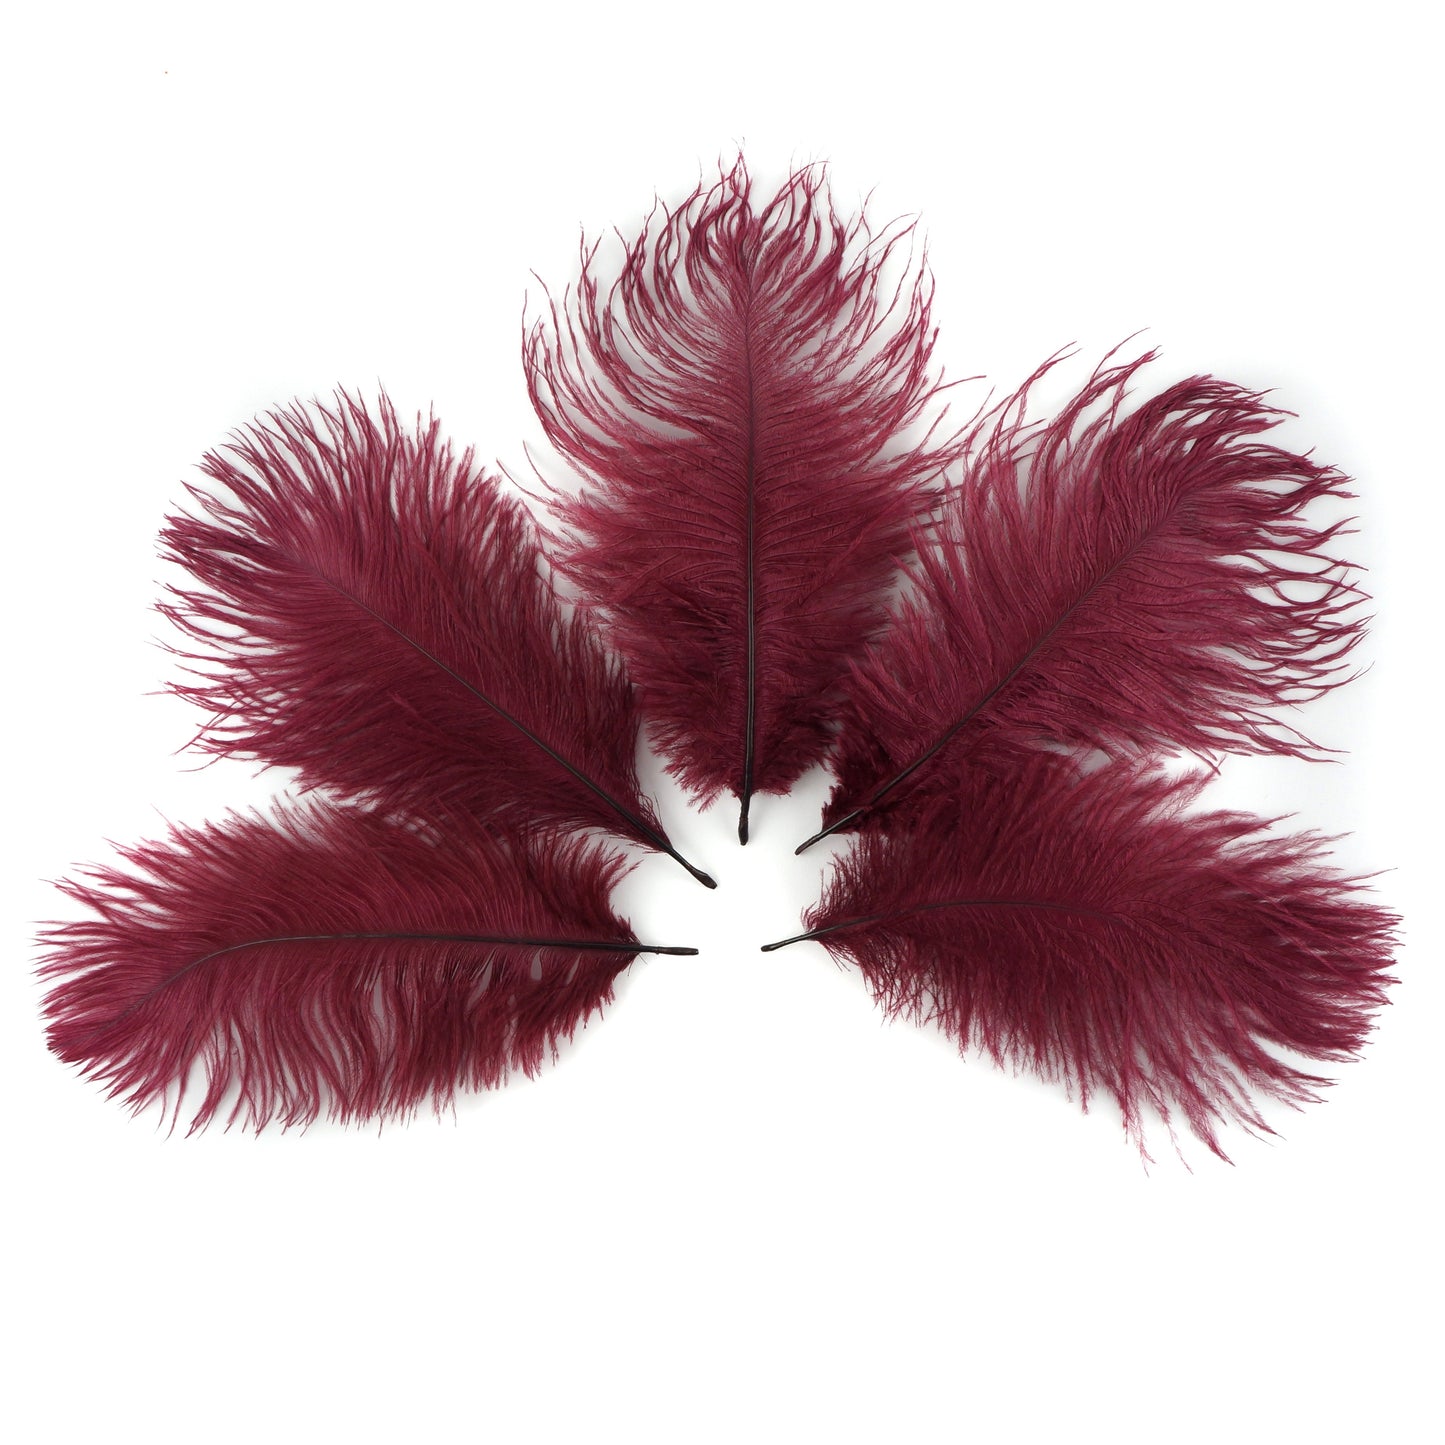 Ostrich Feathers 4-8" Drabs - Burgundy